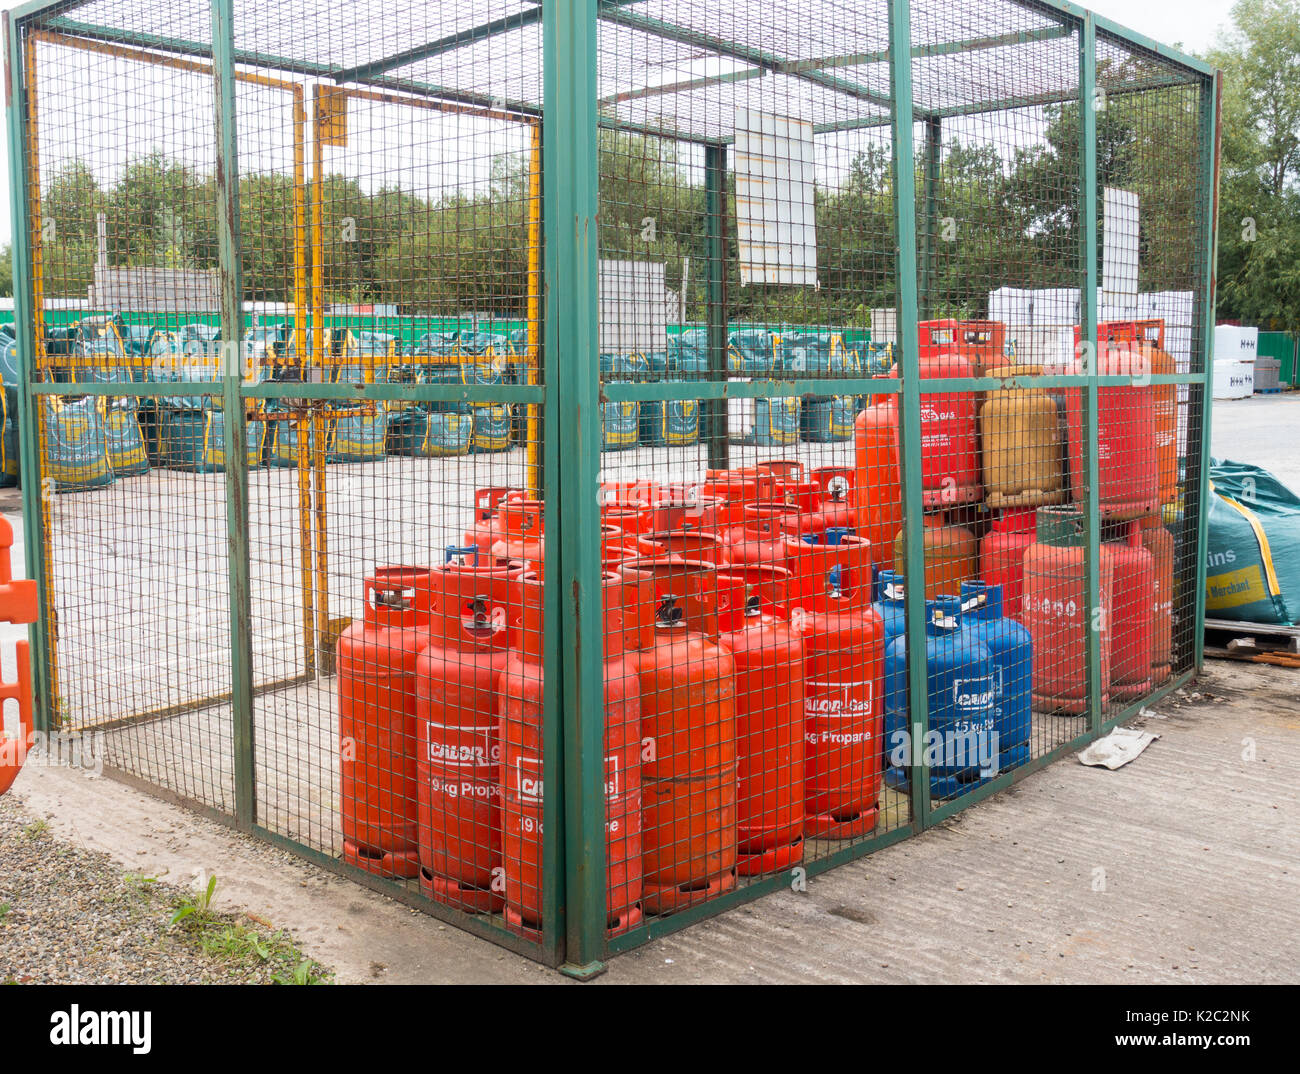 Gas bottles in a security cage on sale at the popular builders merchant Travis Perkins at the Winsford Site, Cheshire, UK Stock Photo